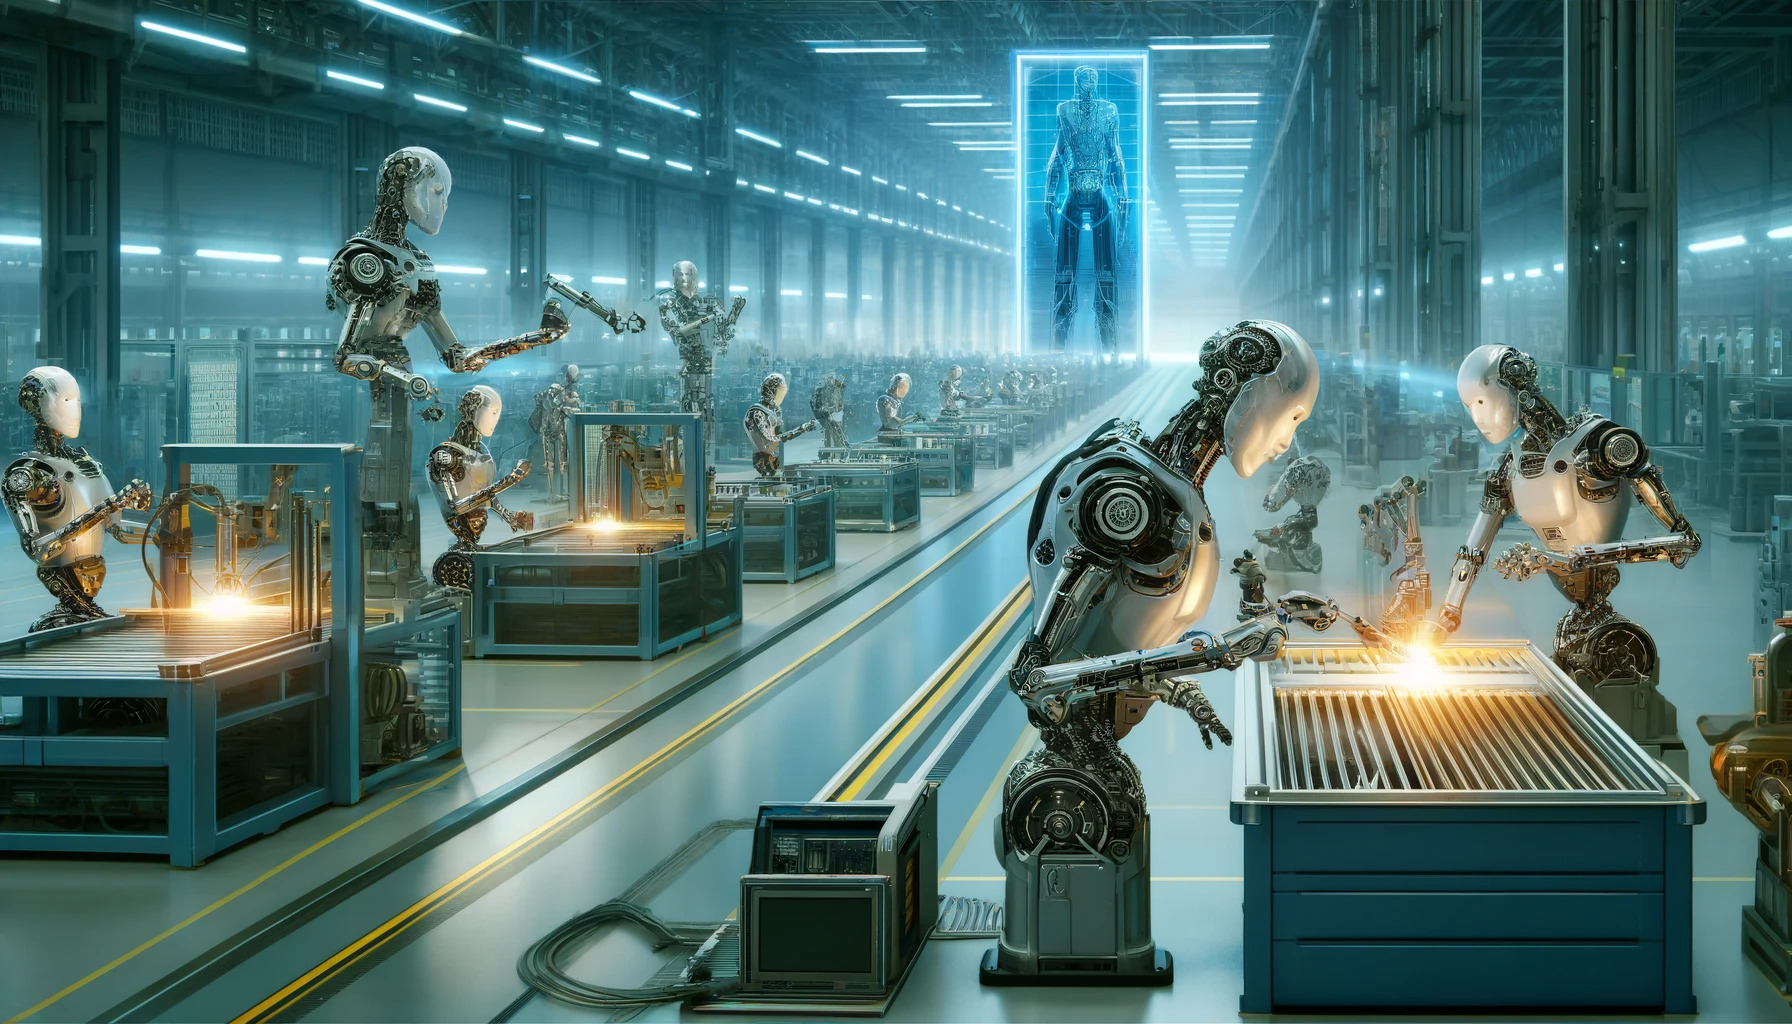 A Indústria 4.0: Realizing Isaac Asimov's Dream in the Age of Robots